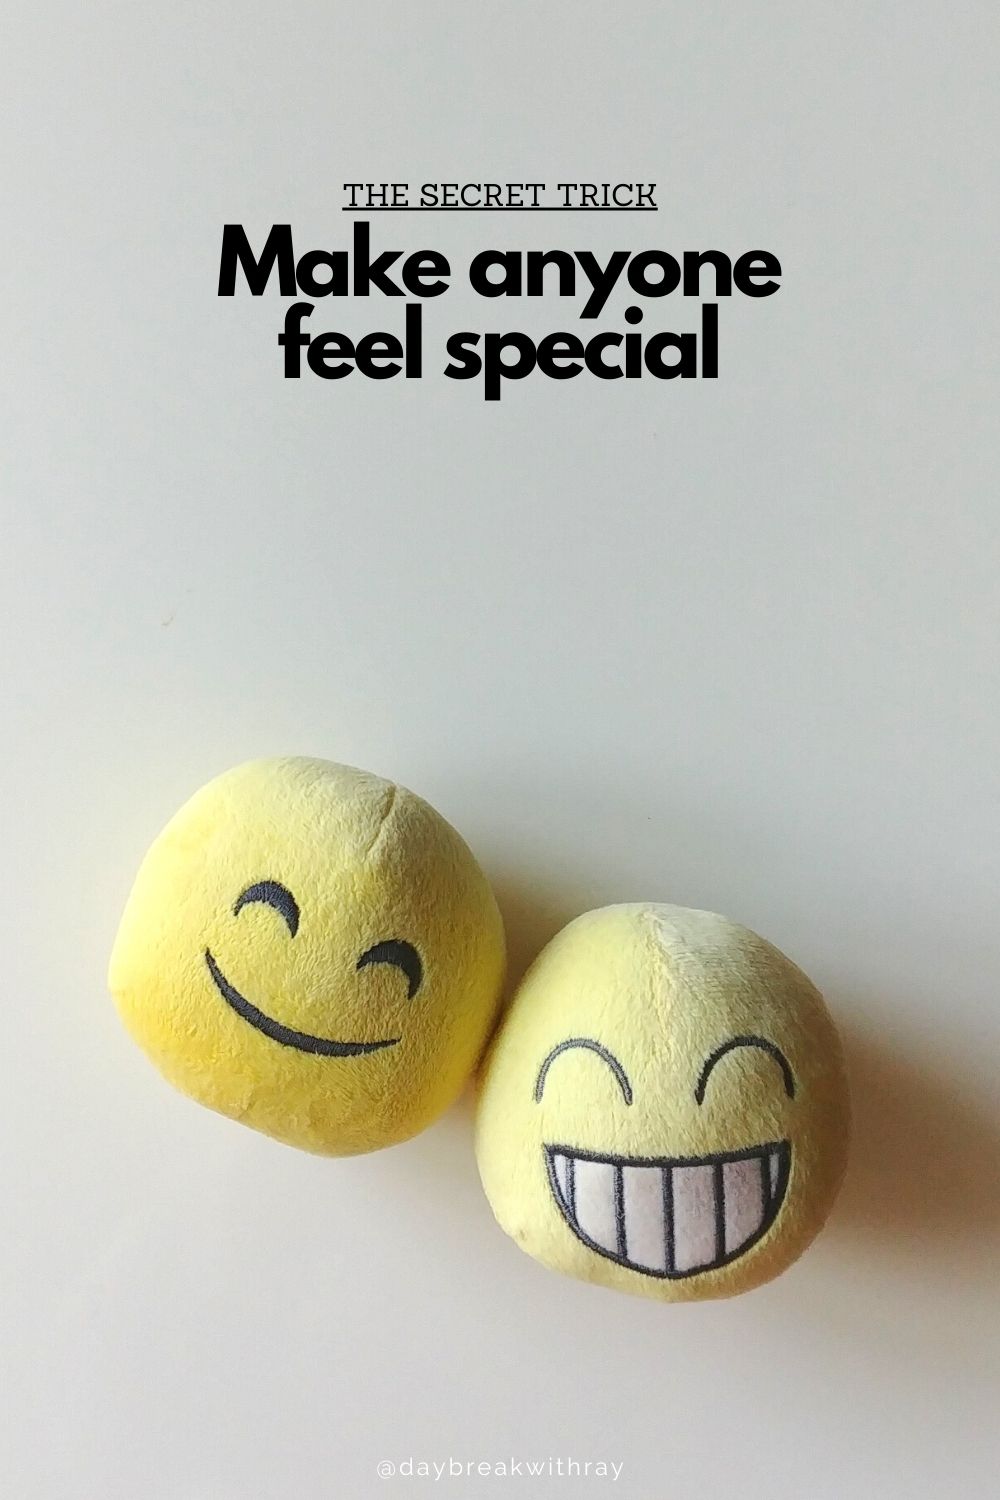 Listen The Secret Trick to Make Anyone Feel Special